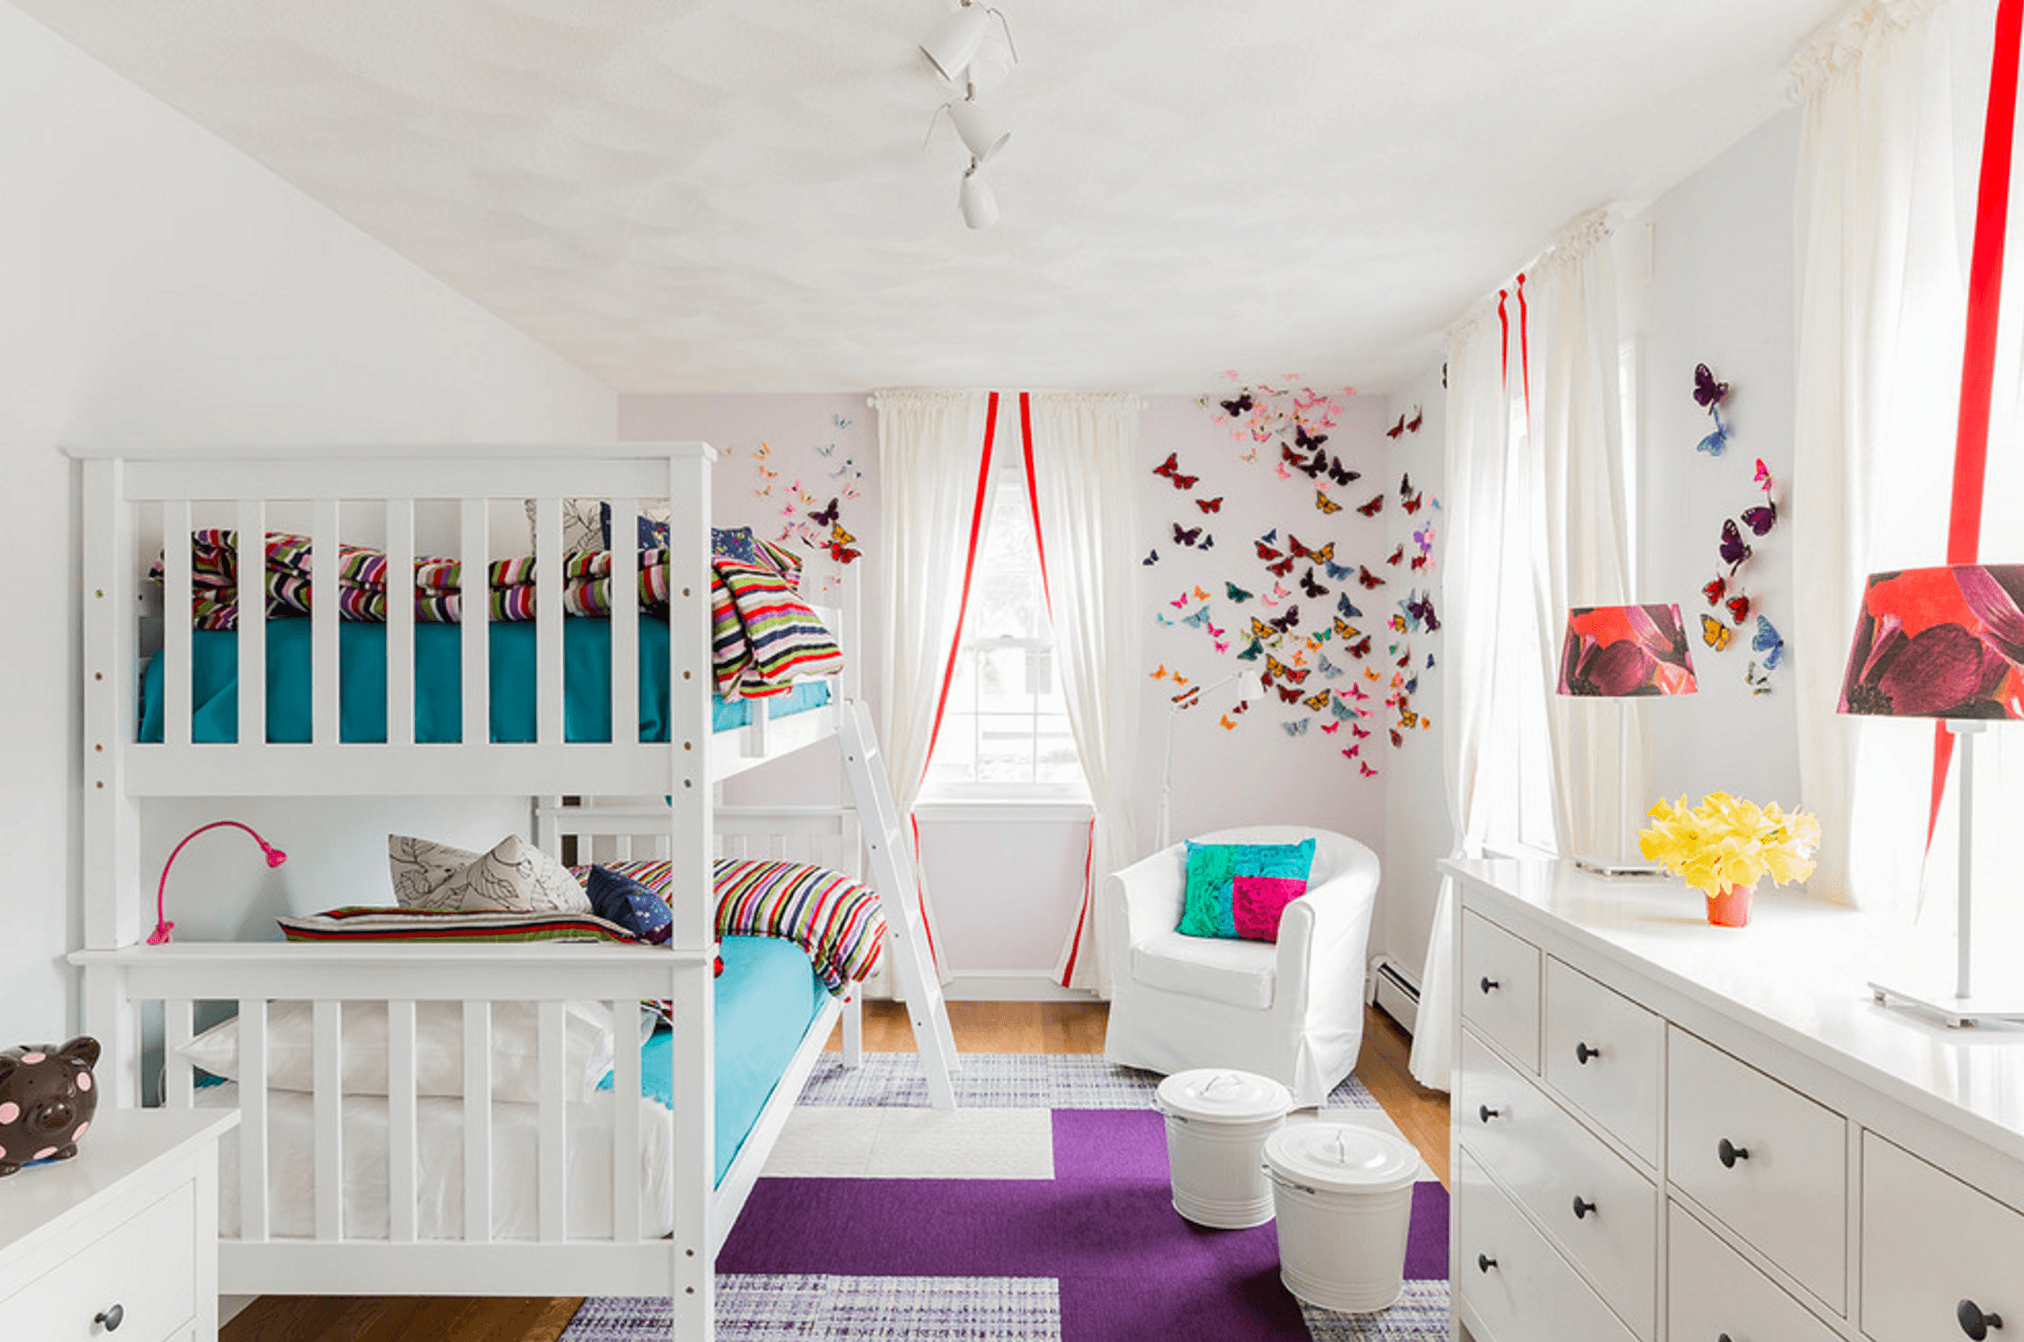 Kids room decor – tips and ideas